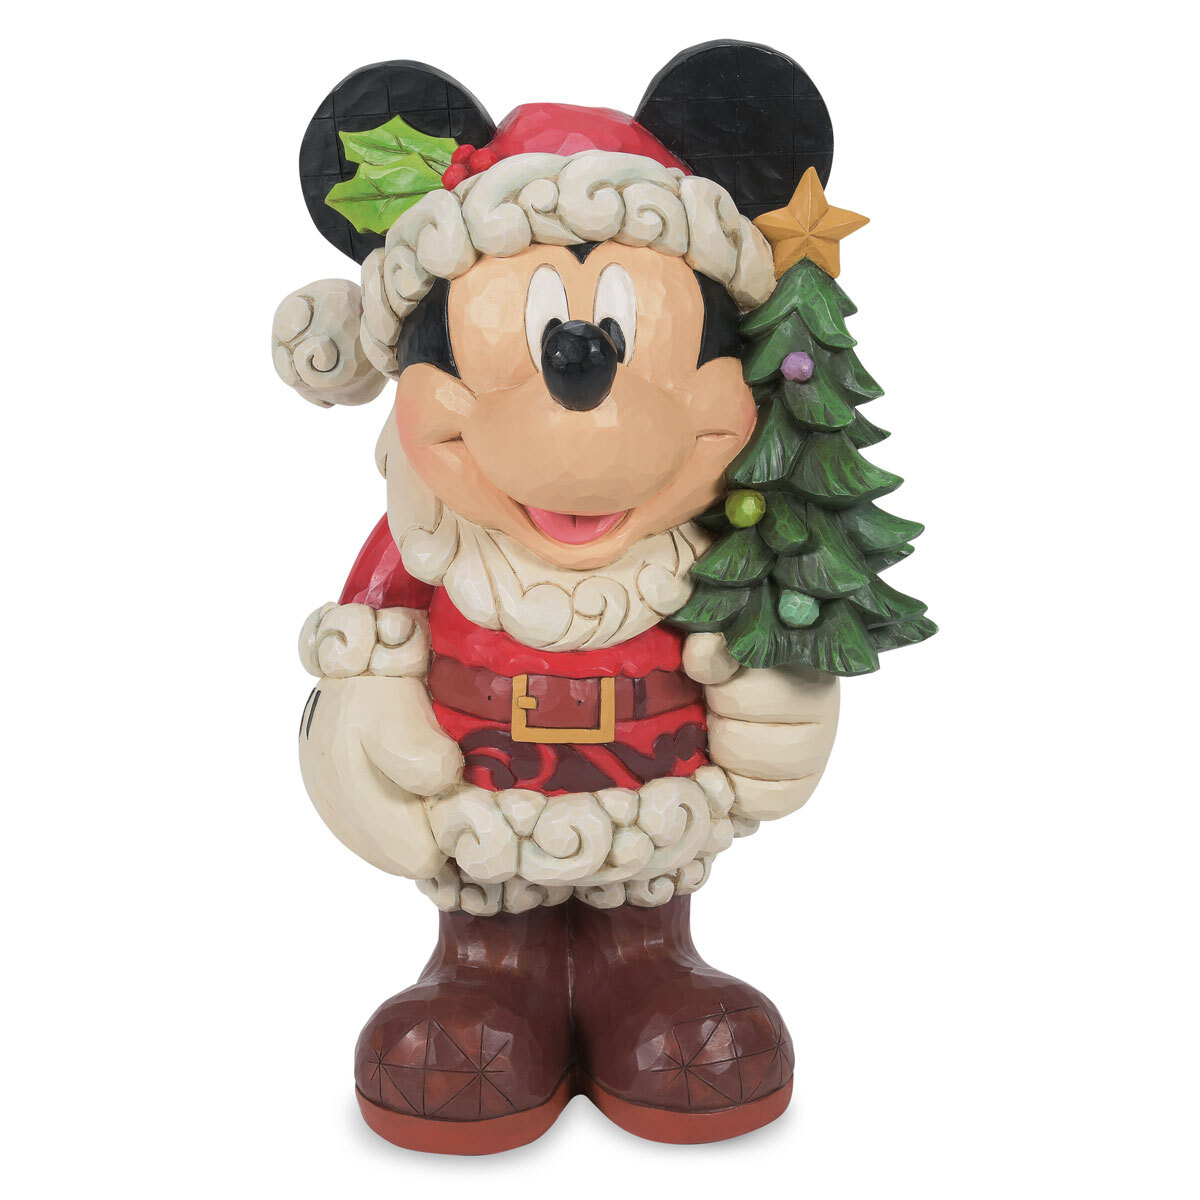 Mickey statue greeter from front